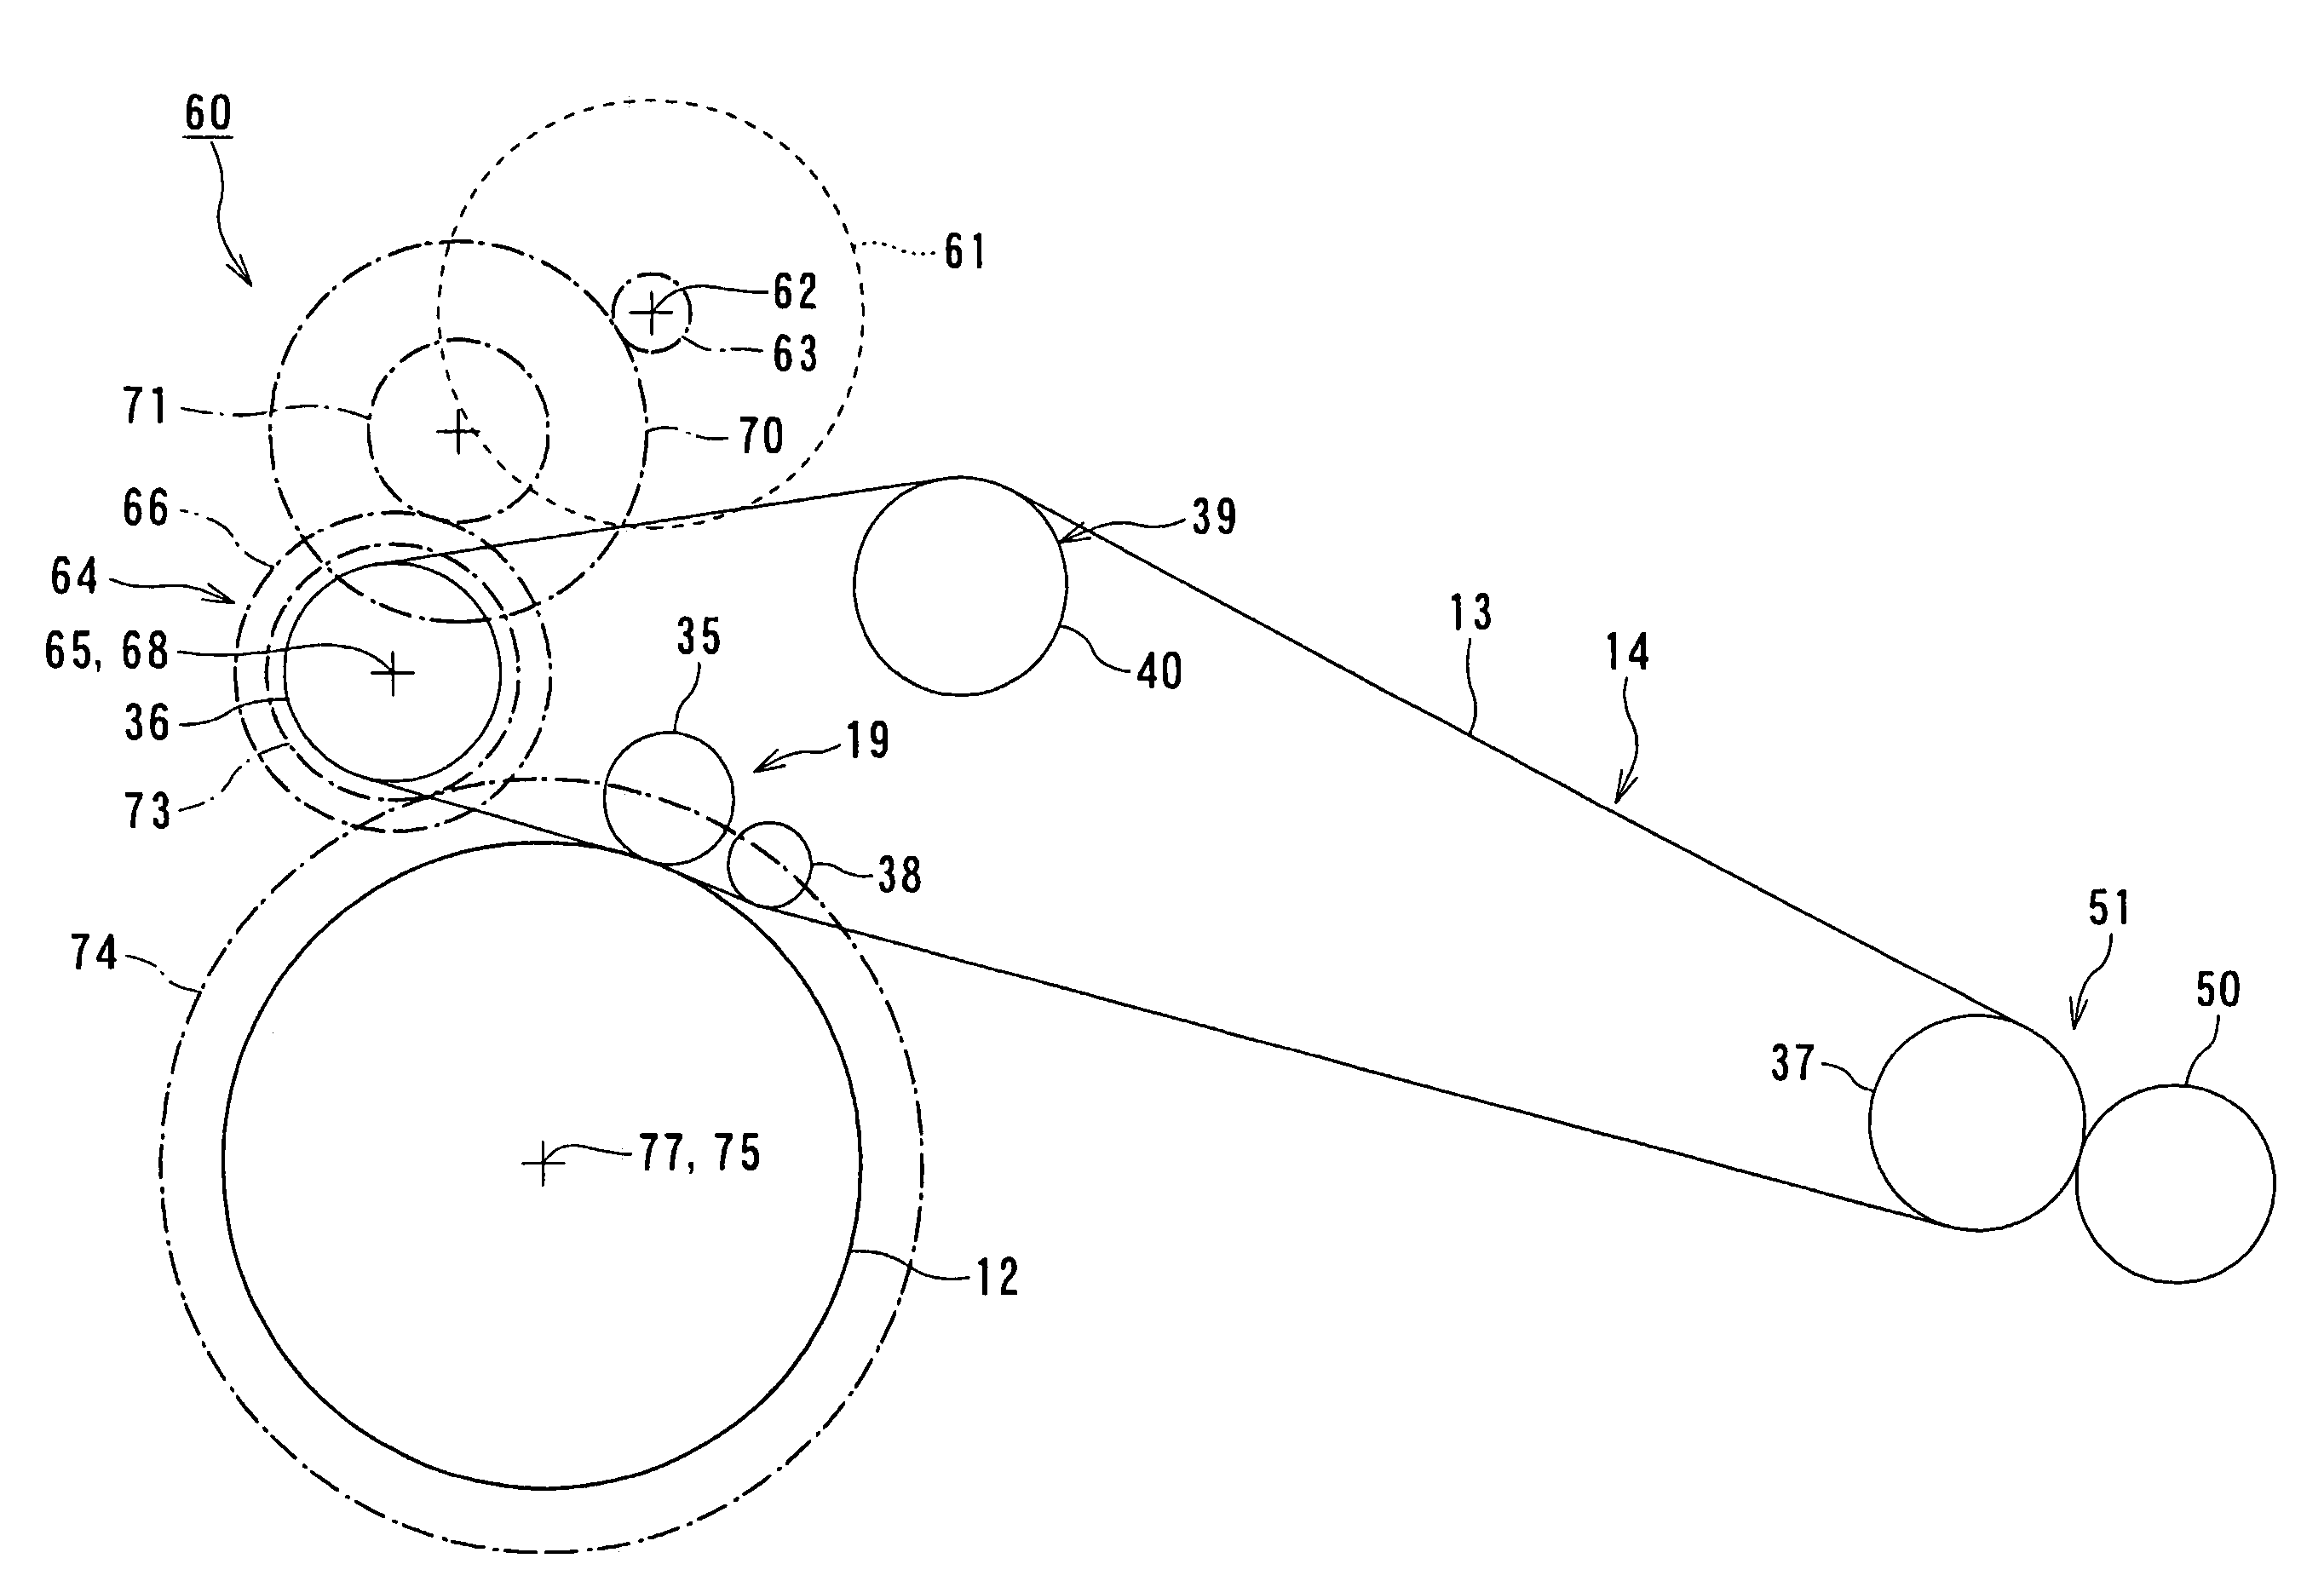 Apparatus for producing images